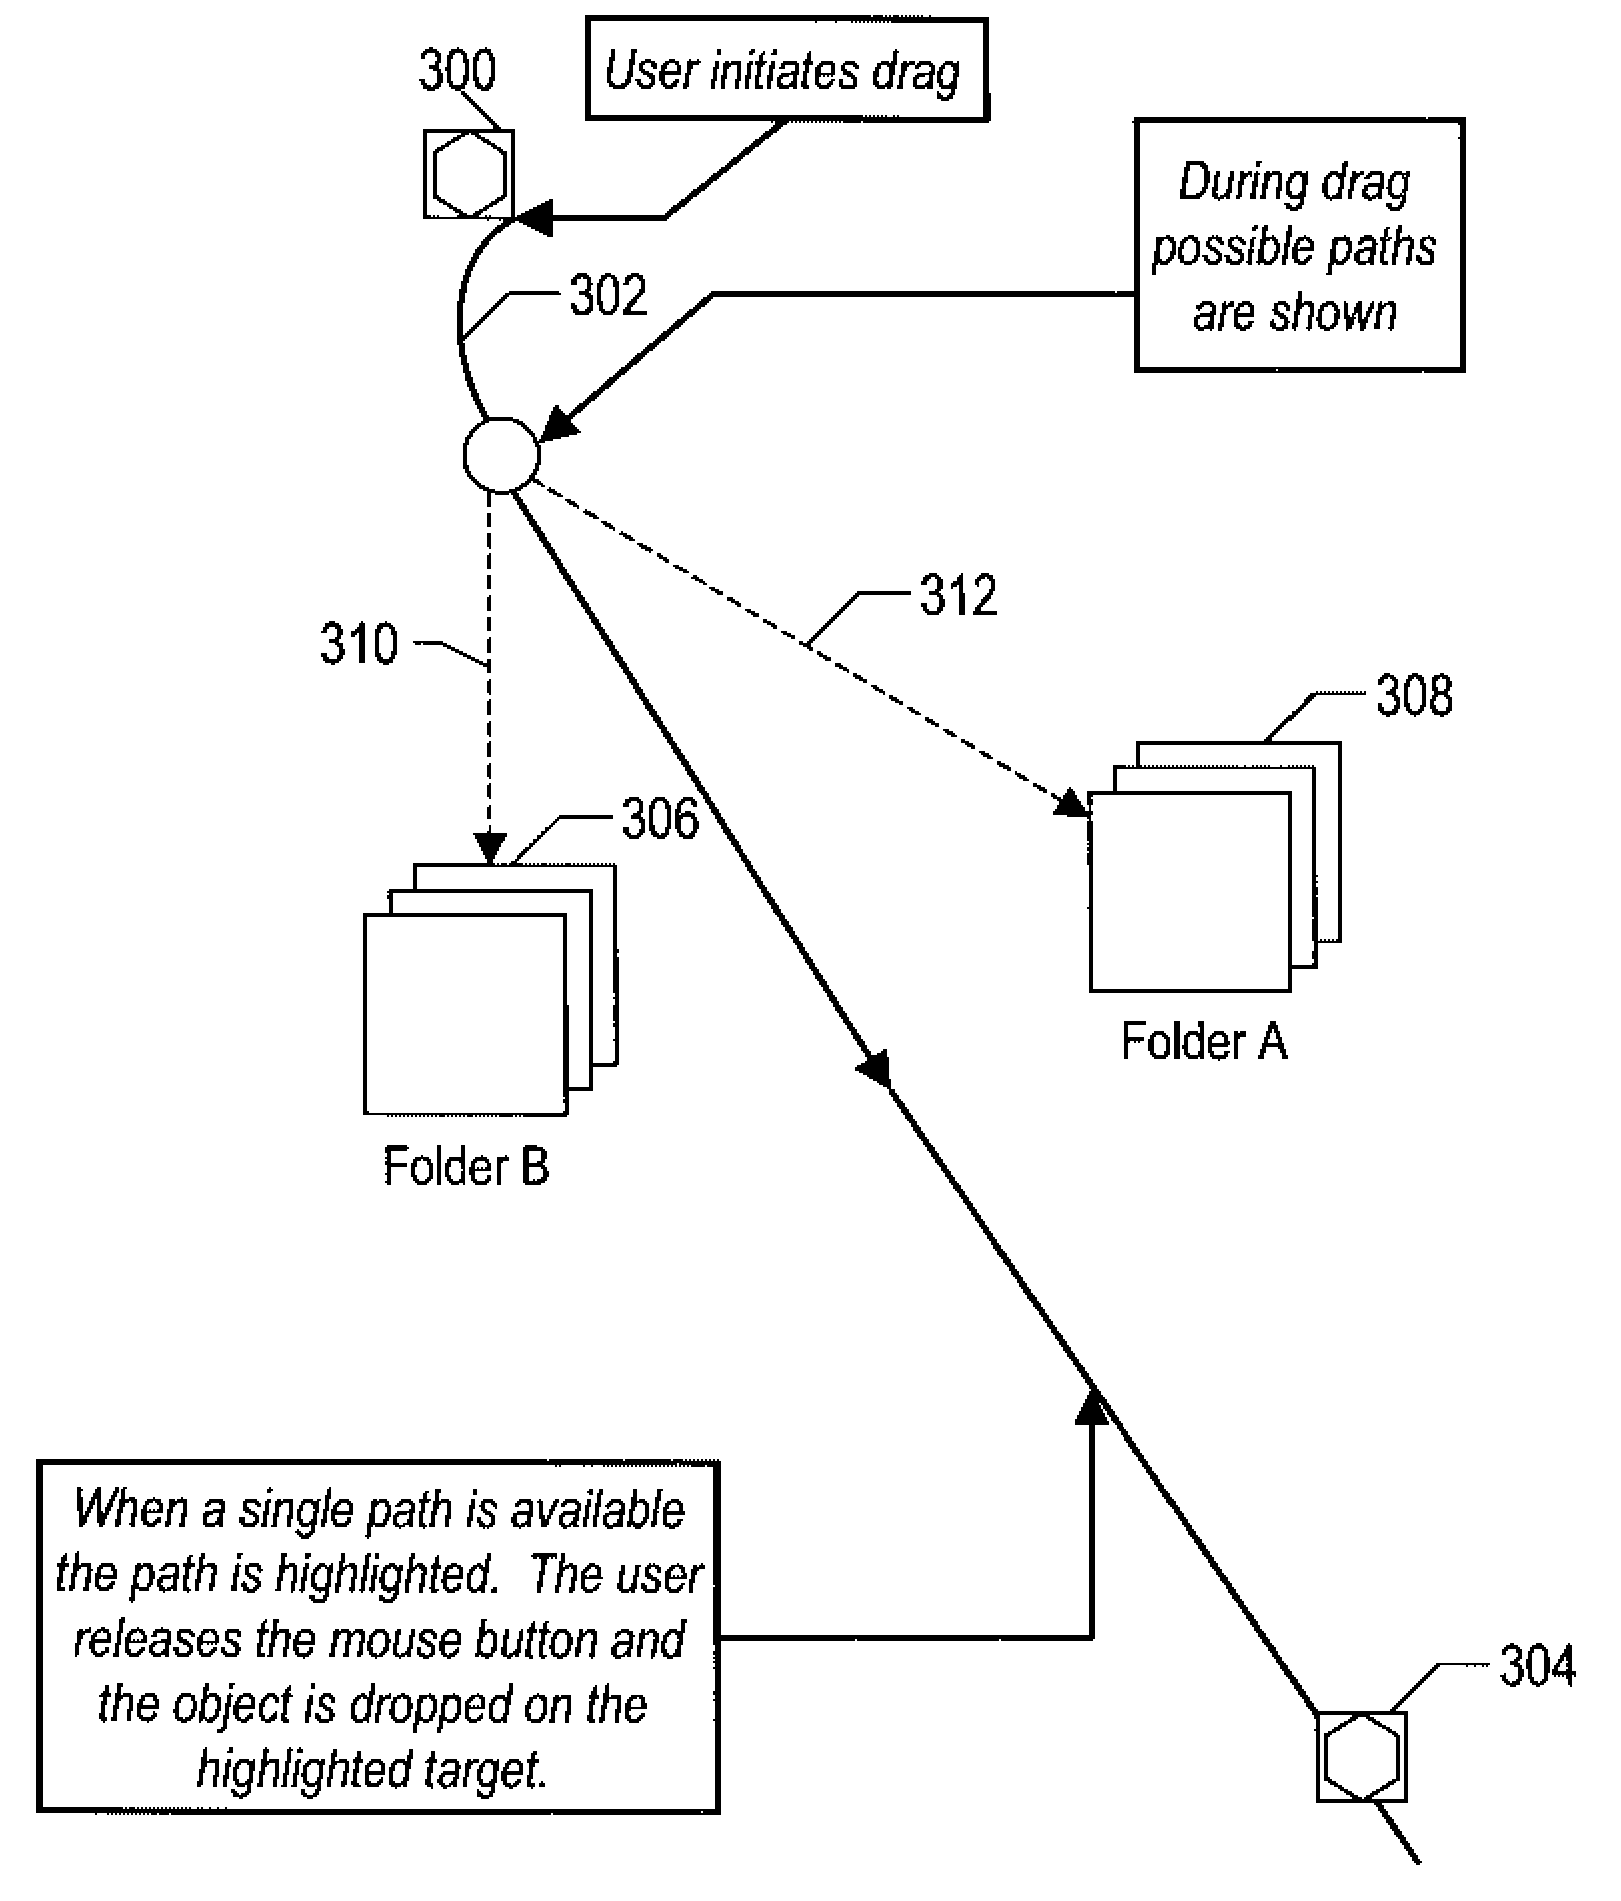 Method For Predictive Drag and Drop Operation To Improve Accessibility